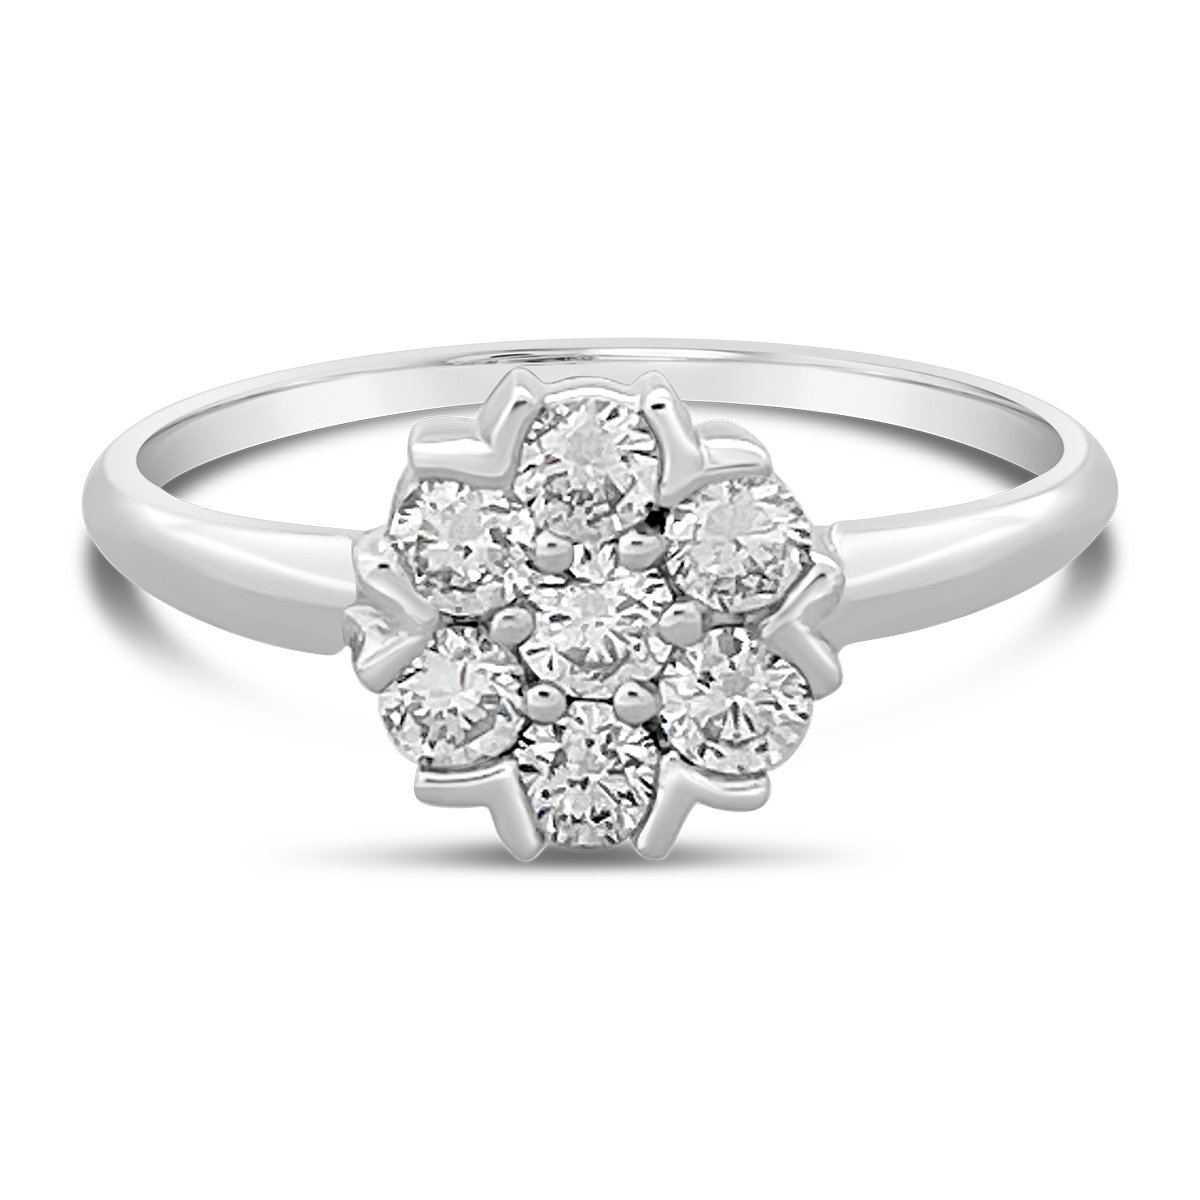 Bayco 18k White Gold Flower Diamond Ring, Size 6 and 7 | Neiman Marcus